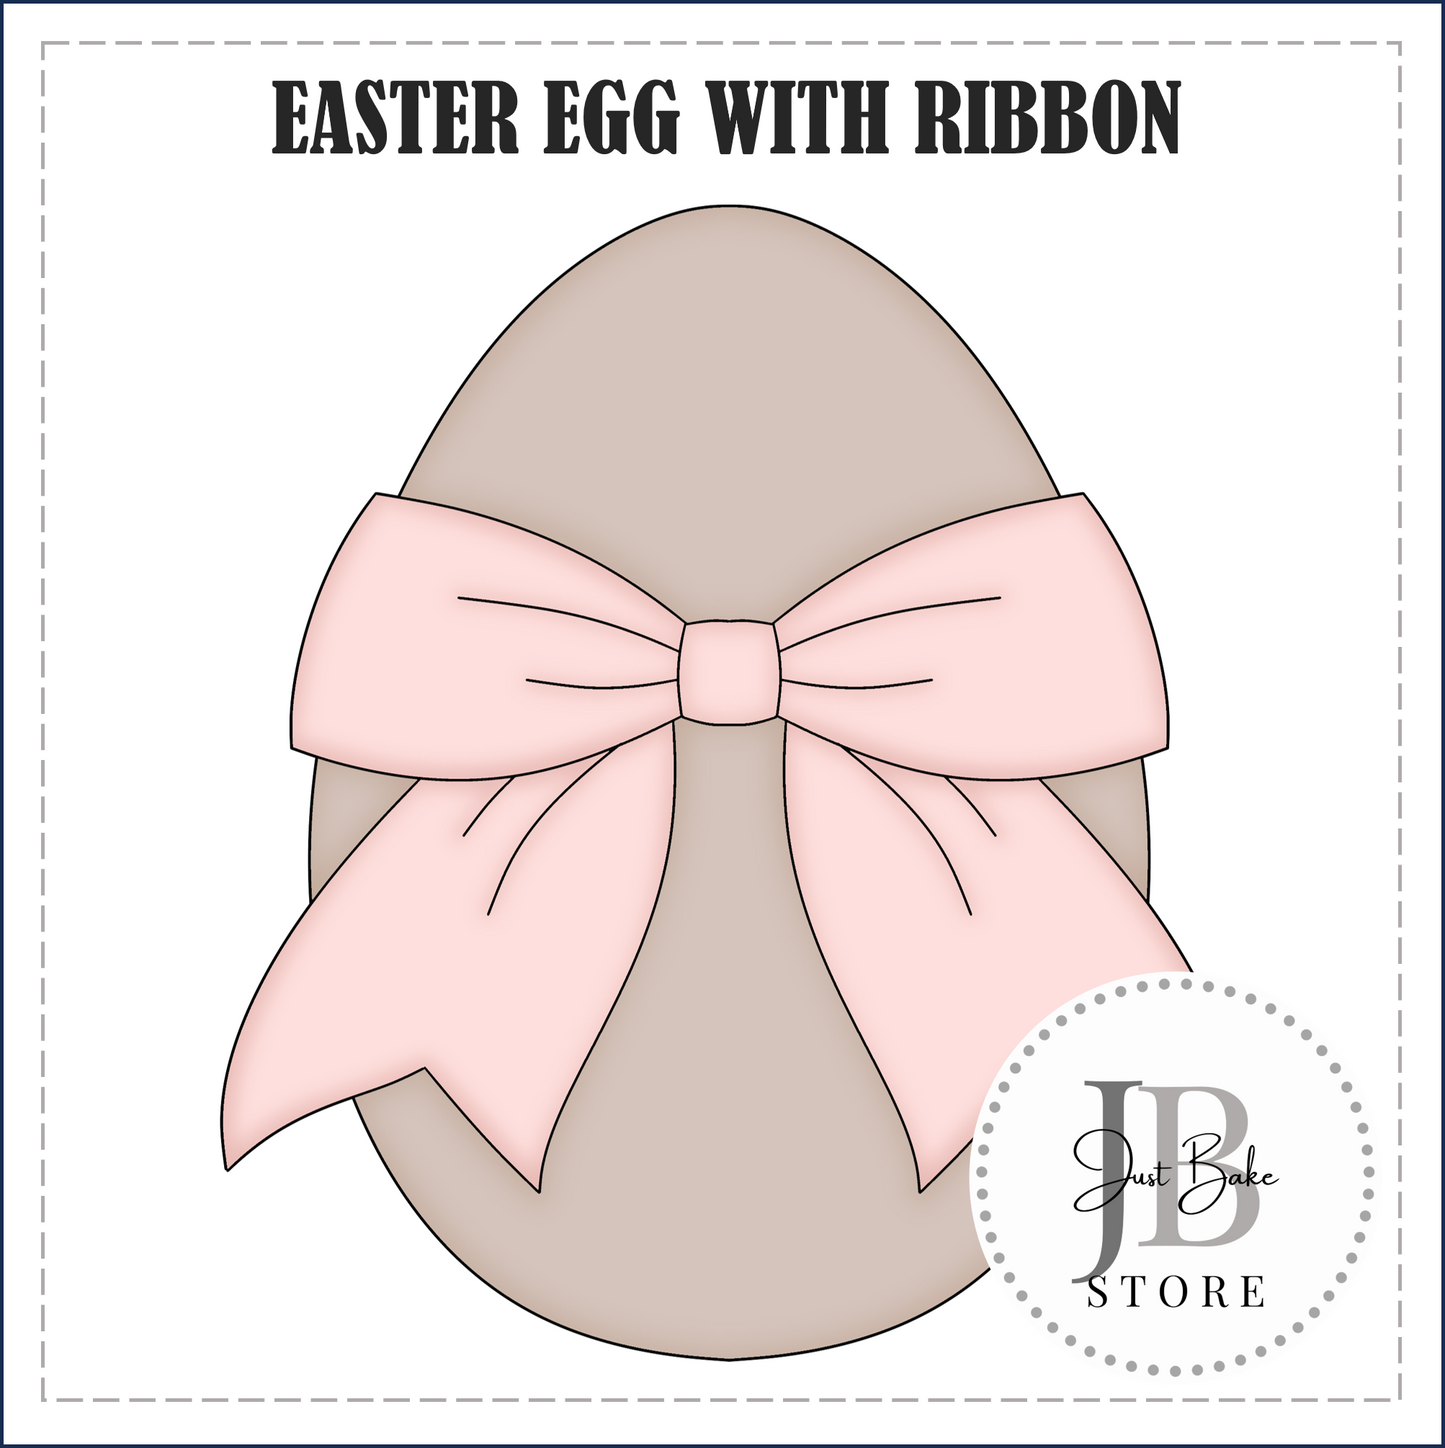 J339 - EASTER EGG WITH RIBBON COOKIE CUTTER